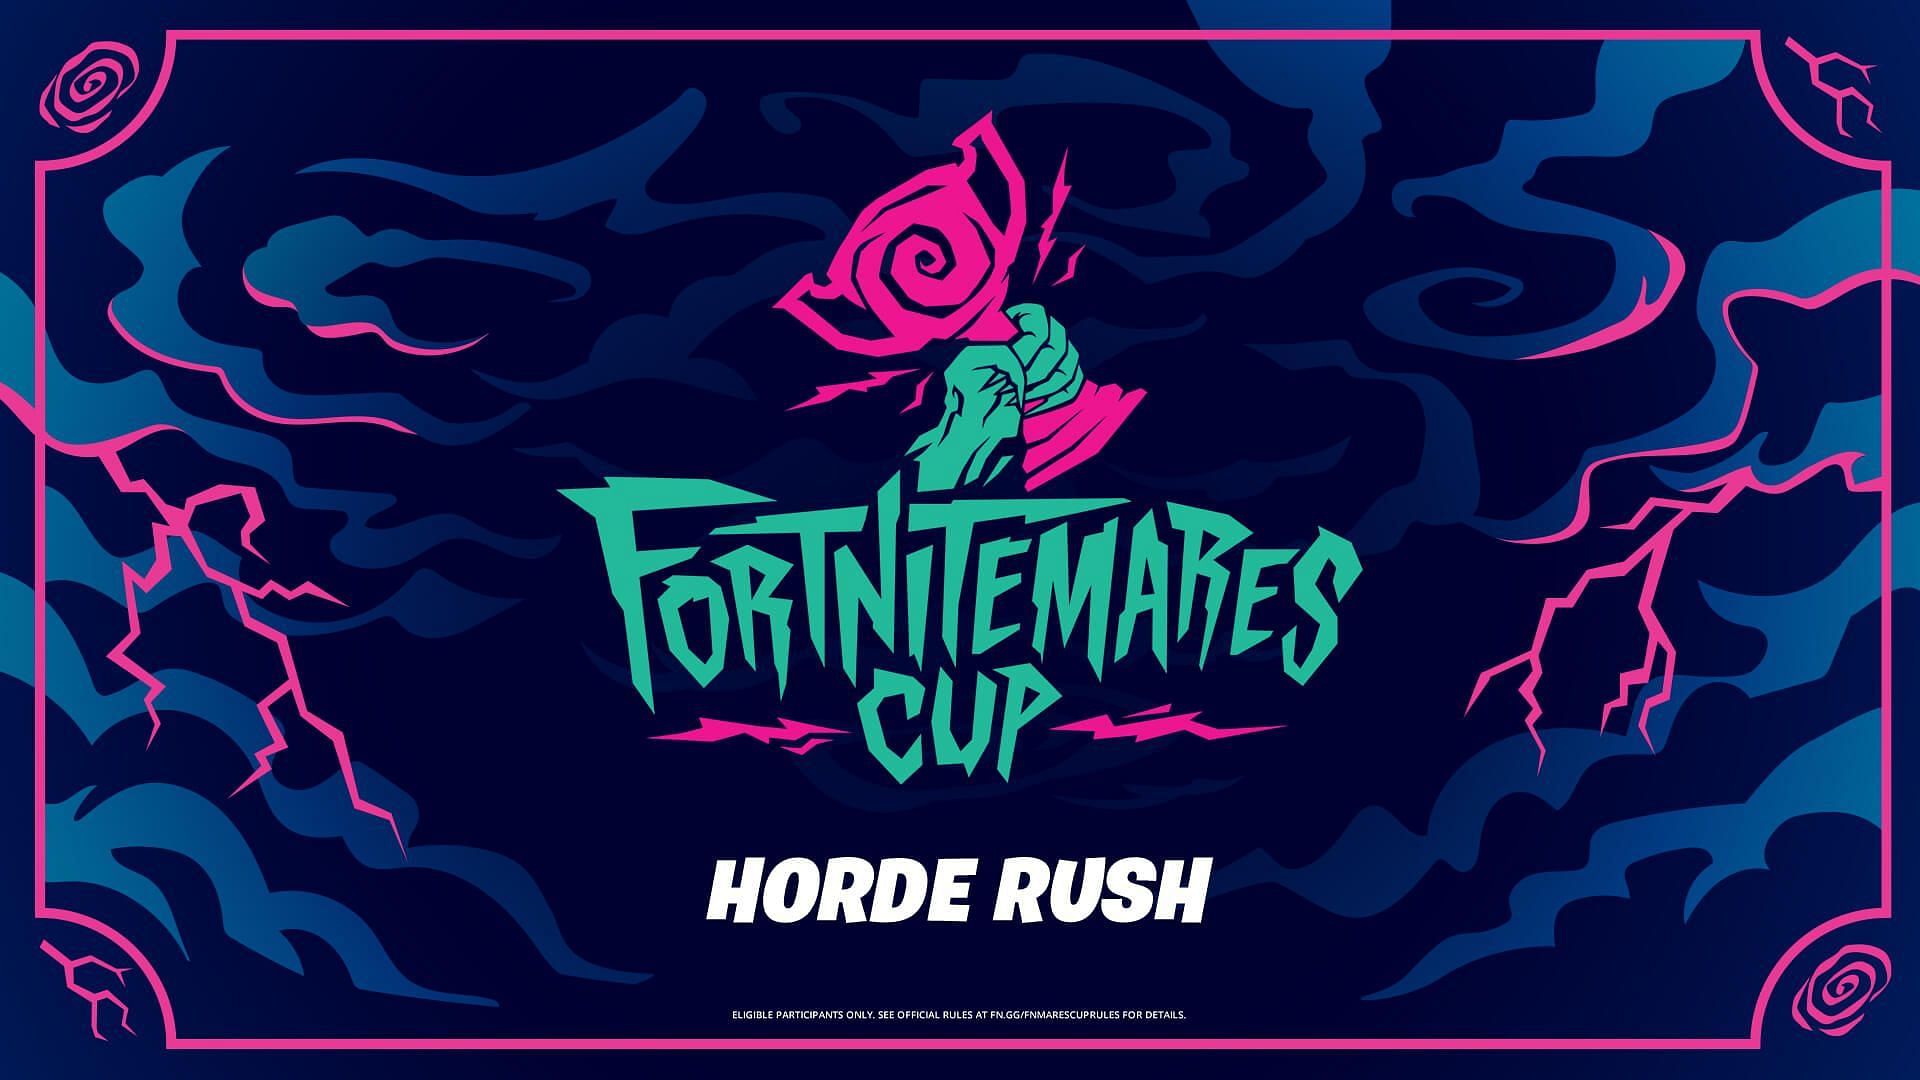 Fortnitemares Cup is launching in just two days, with free rewards and more (Image via Epic Games)